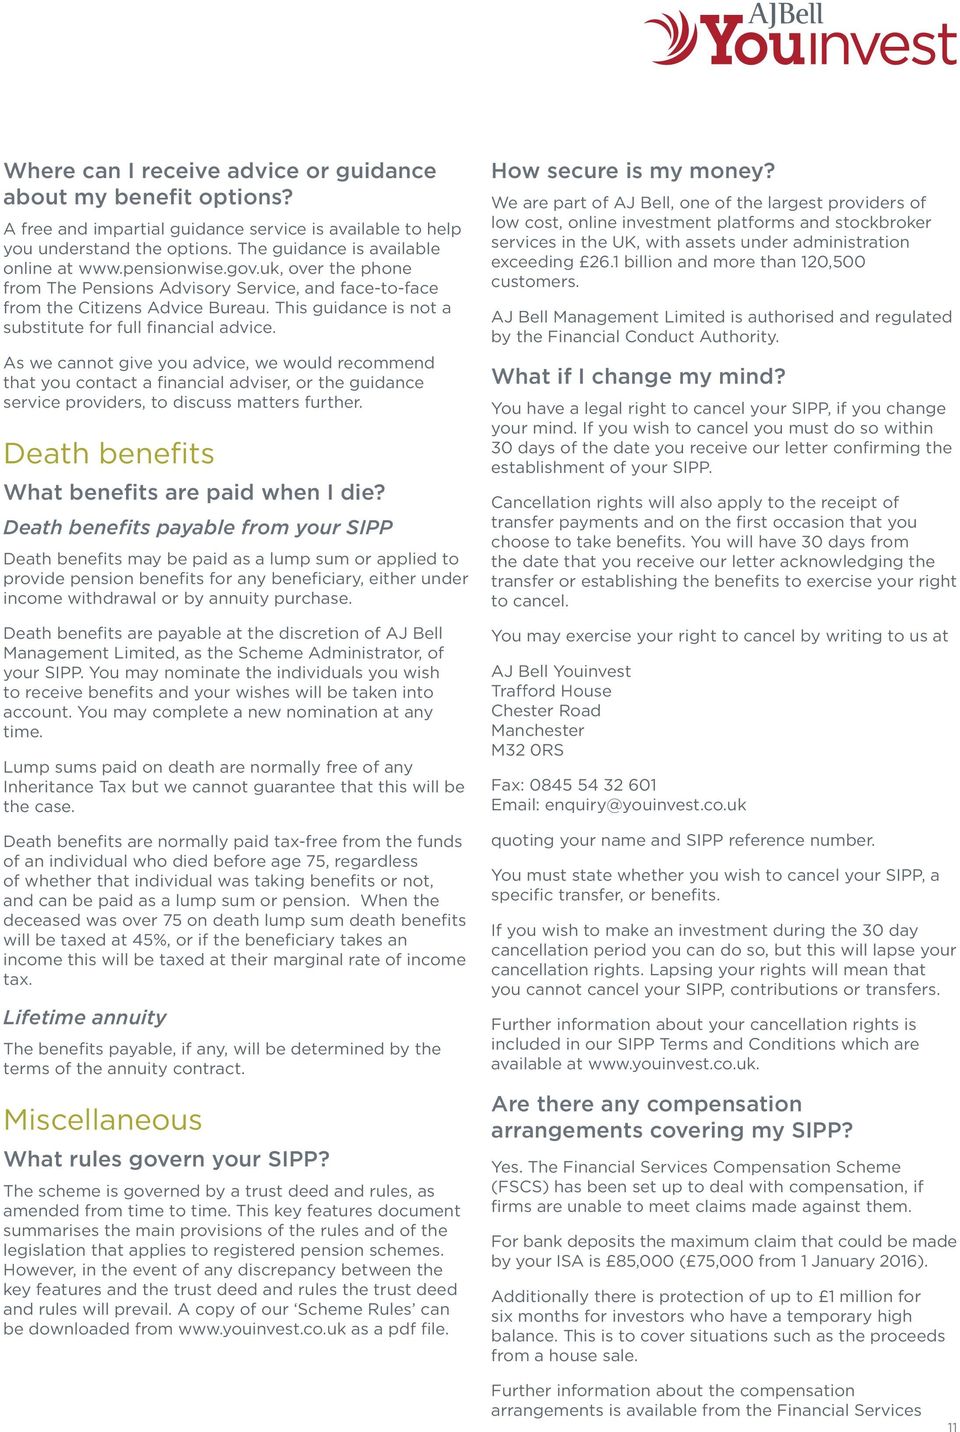 As we cannot give you advice, we would recommend that you contact a financial adviser, or the guidance service providers, to discuss matters further. Death benefits What benefits are paid when I die?